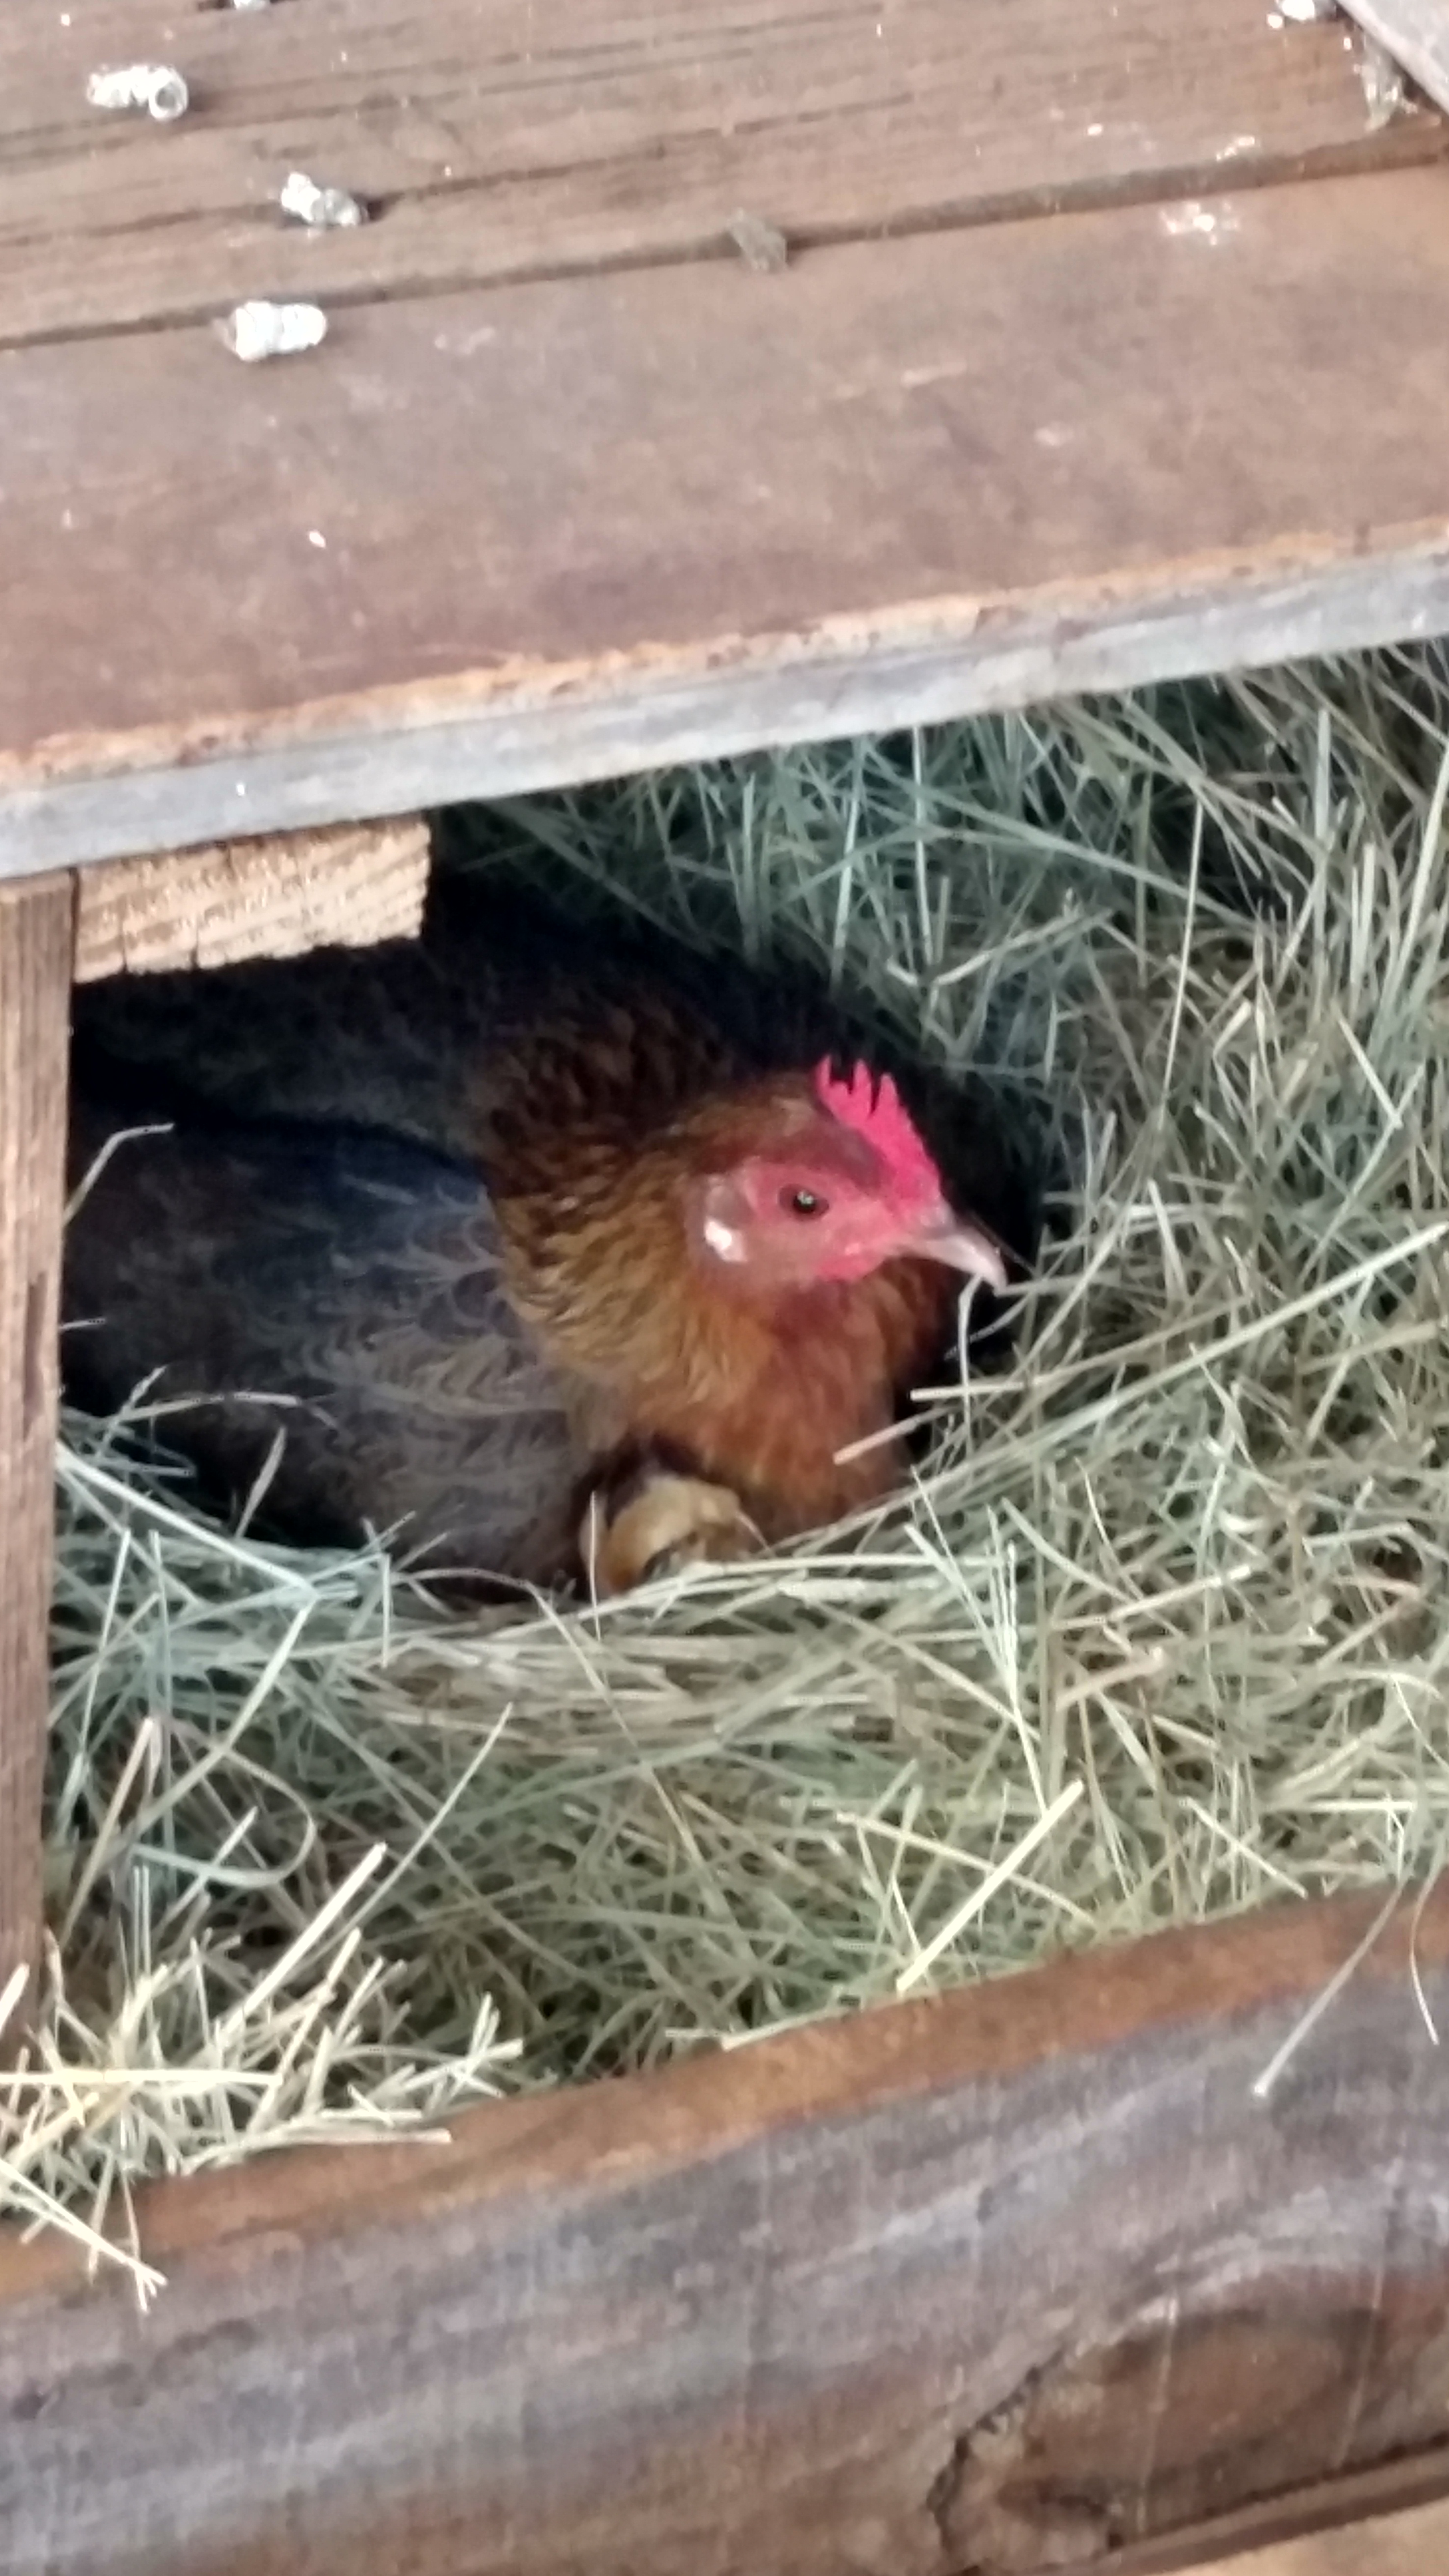 Baby chick peeking out from momma.  Looks like it's sleeping.  Thank you everyone for info on site.   Patience....am keeping eye on them.  But not disturbing.